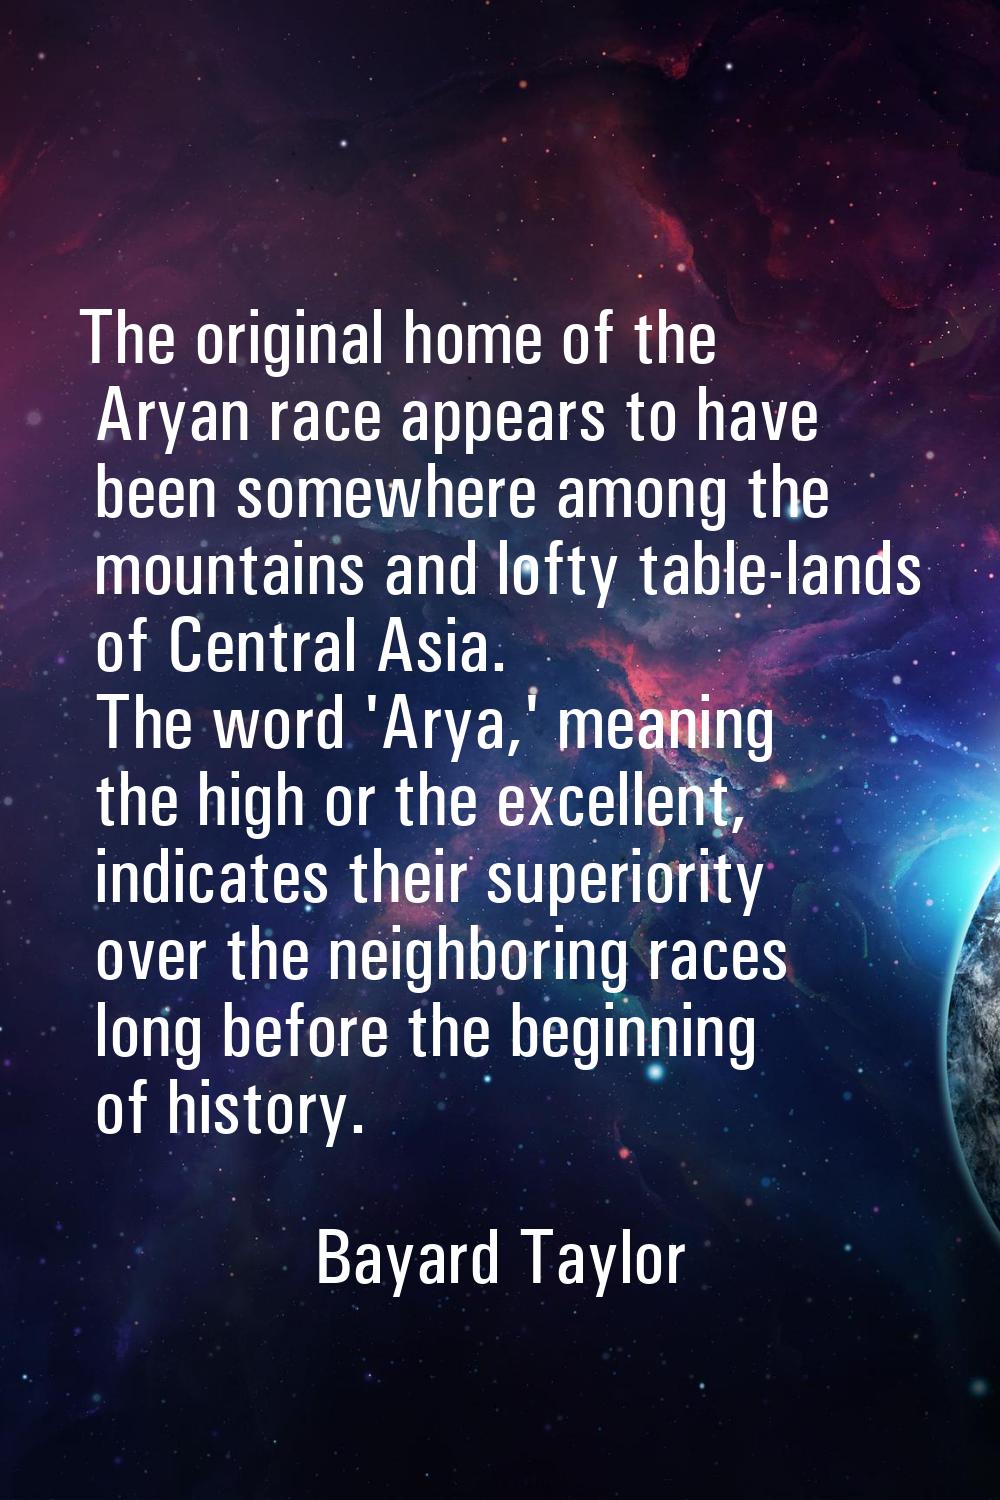 The original home of the Aryan race appears to have been somewhere among the mountains and lofty ta